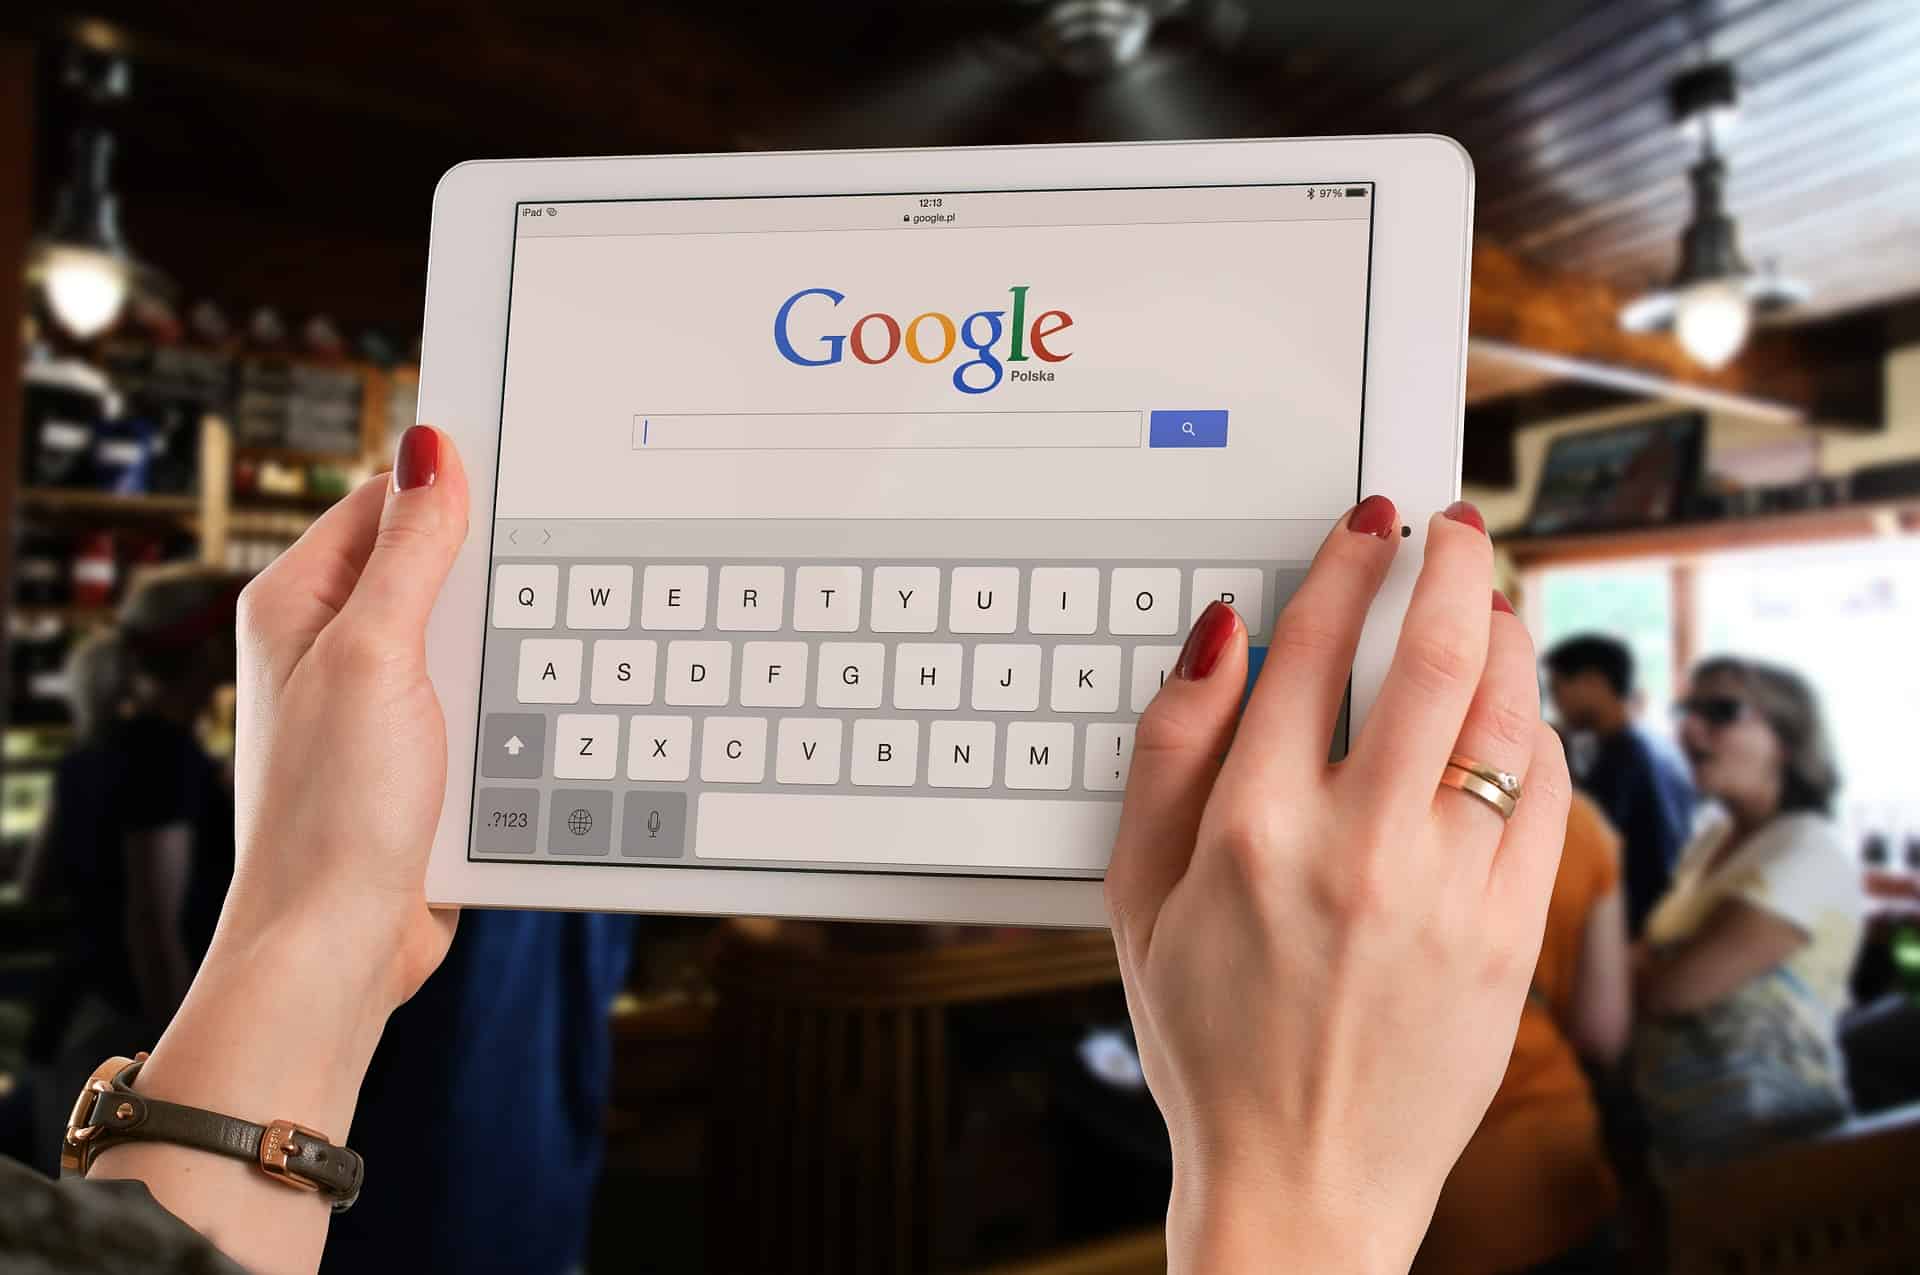 5 easy ways to get restaurant reservations with Google in 2023